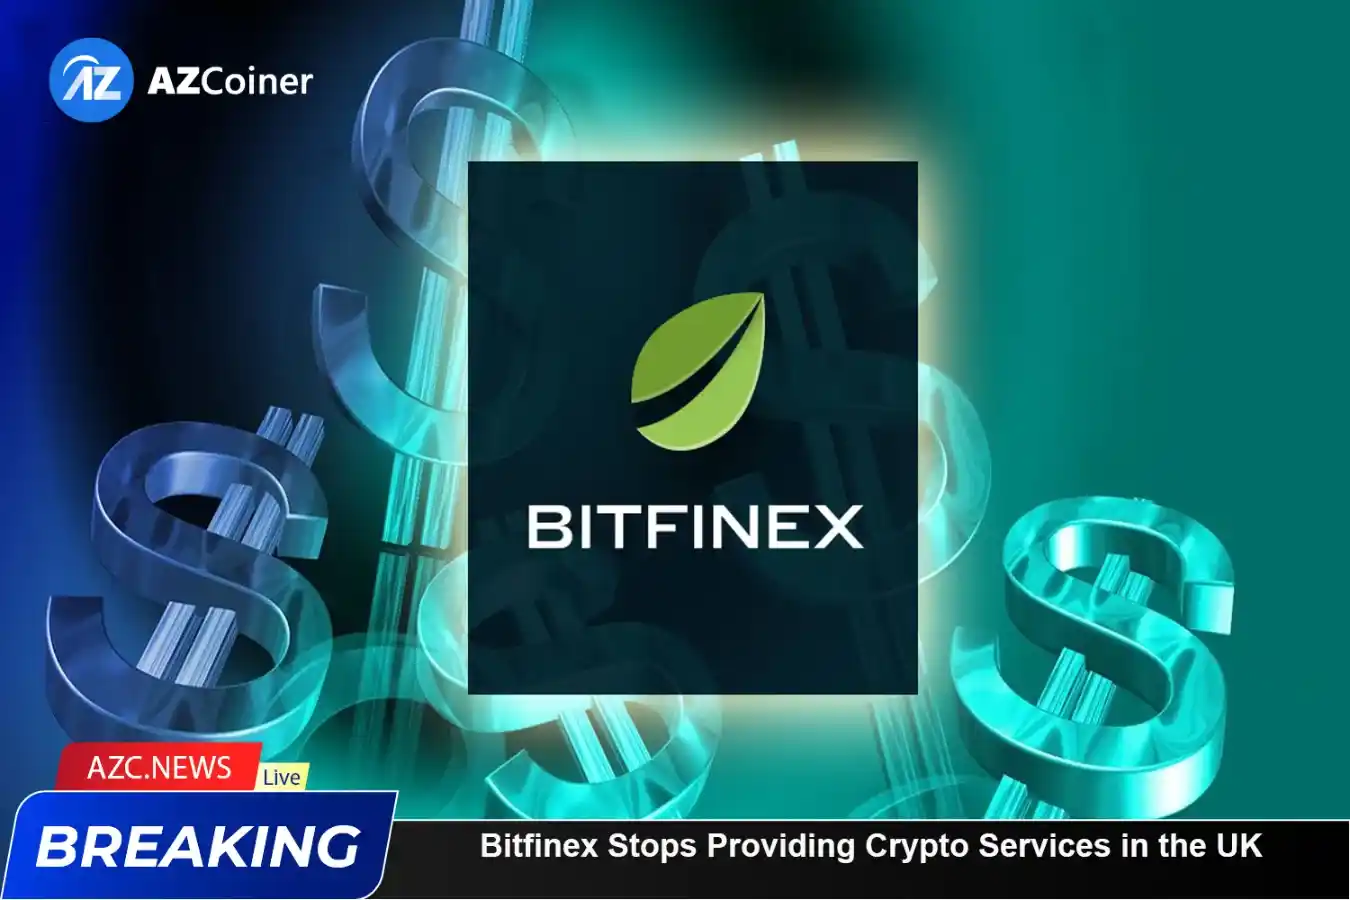 Bitfinex Stops Providing Crypto Services To Customers In The Uk_65bad11346e50.webp